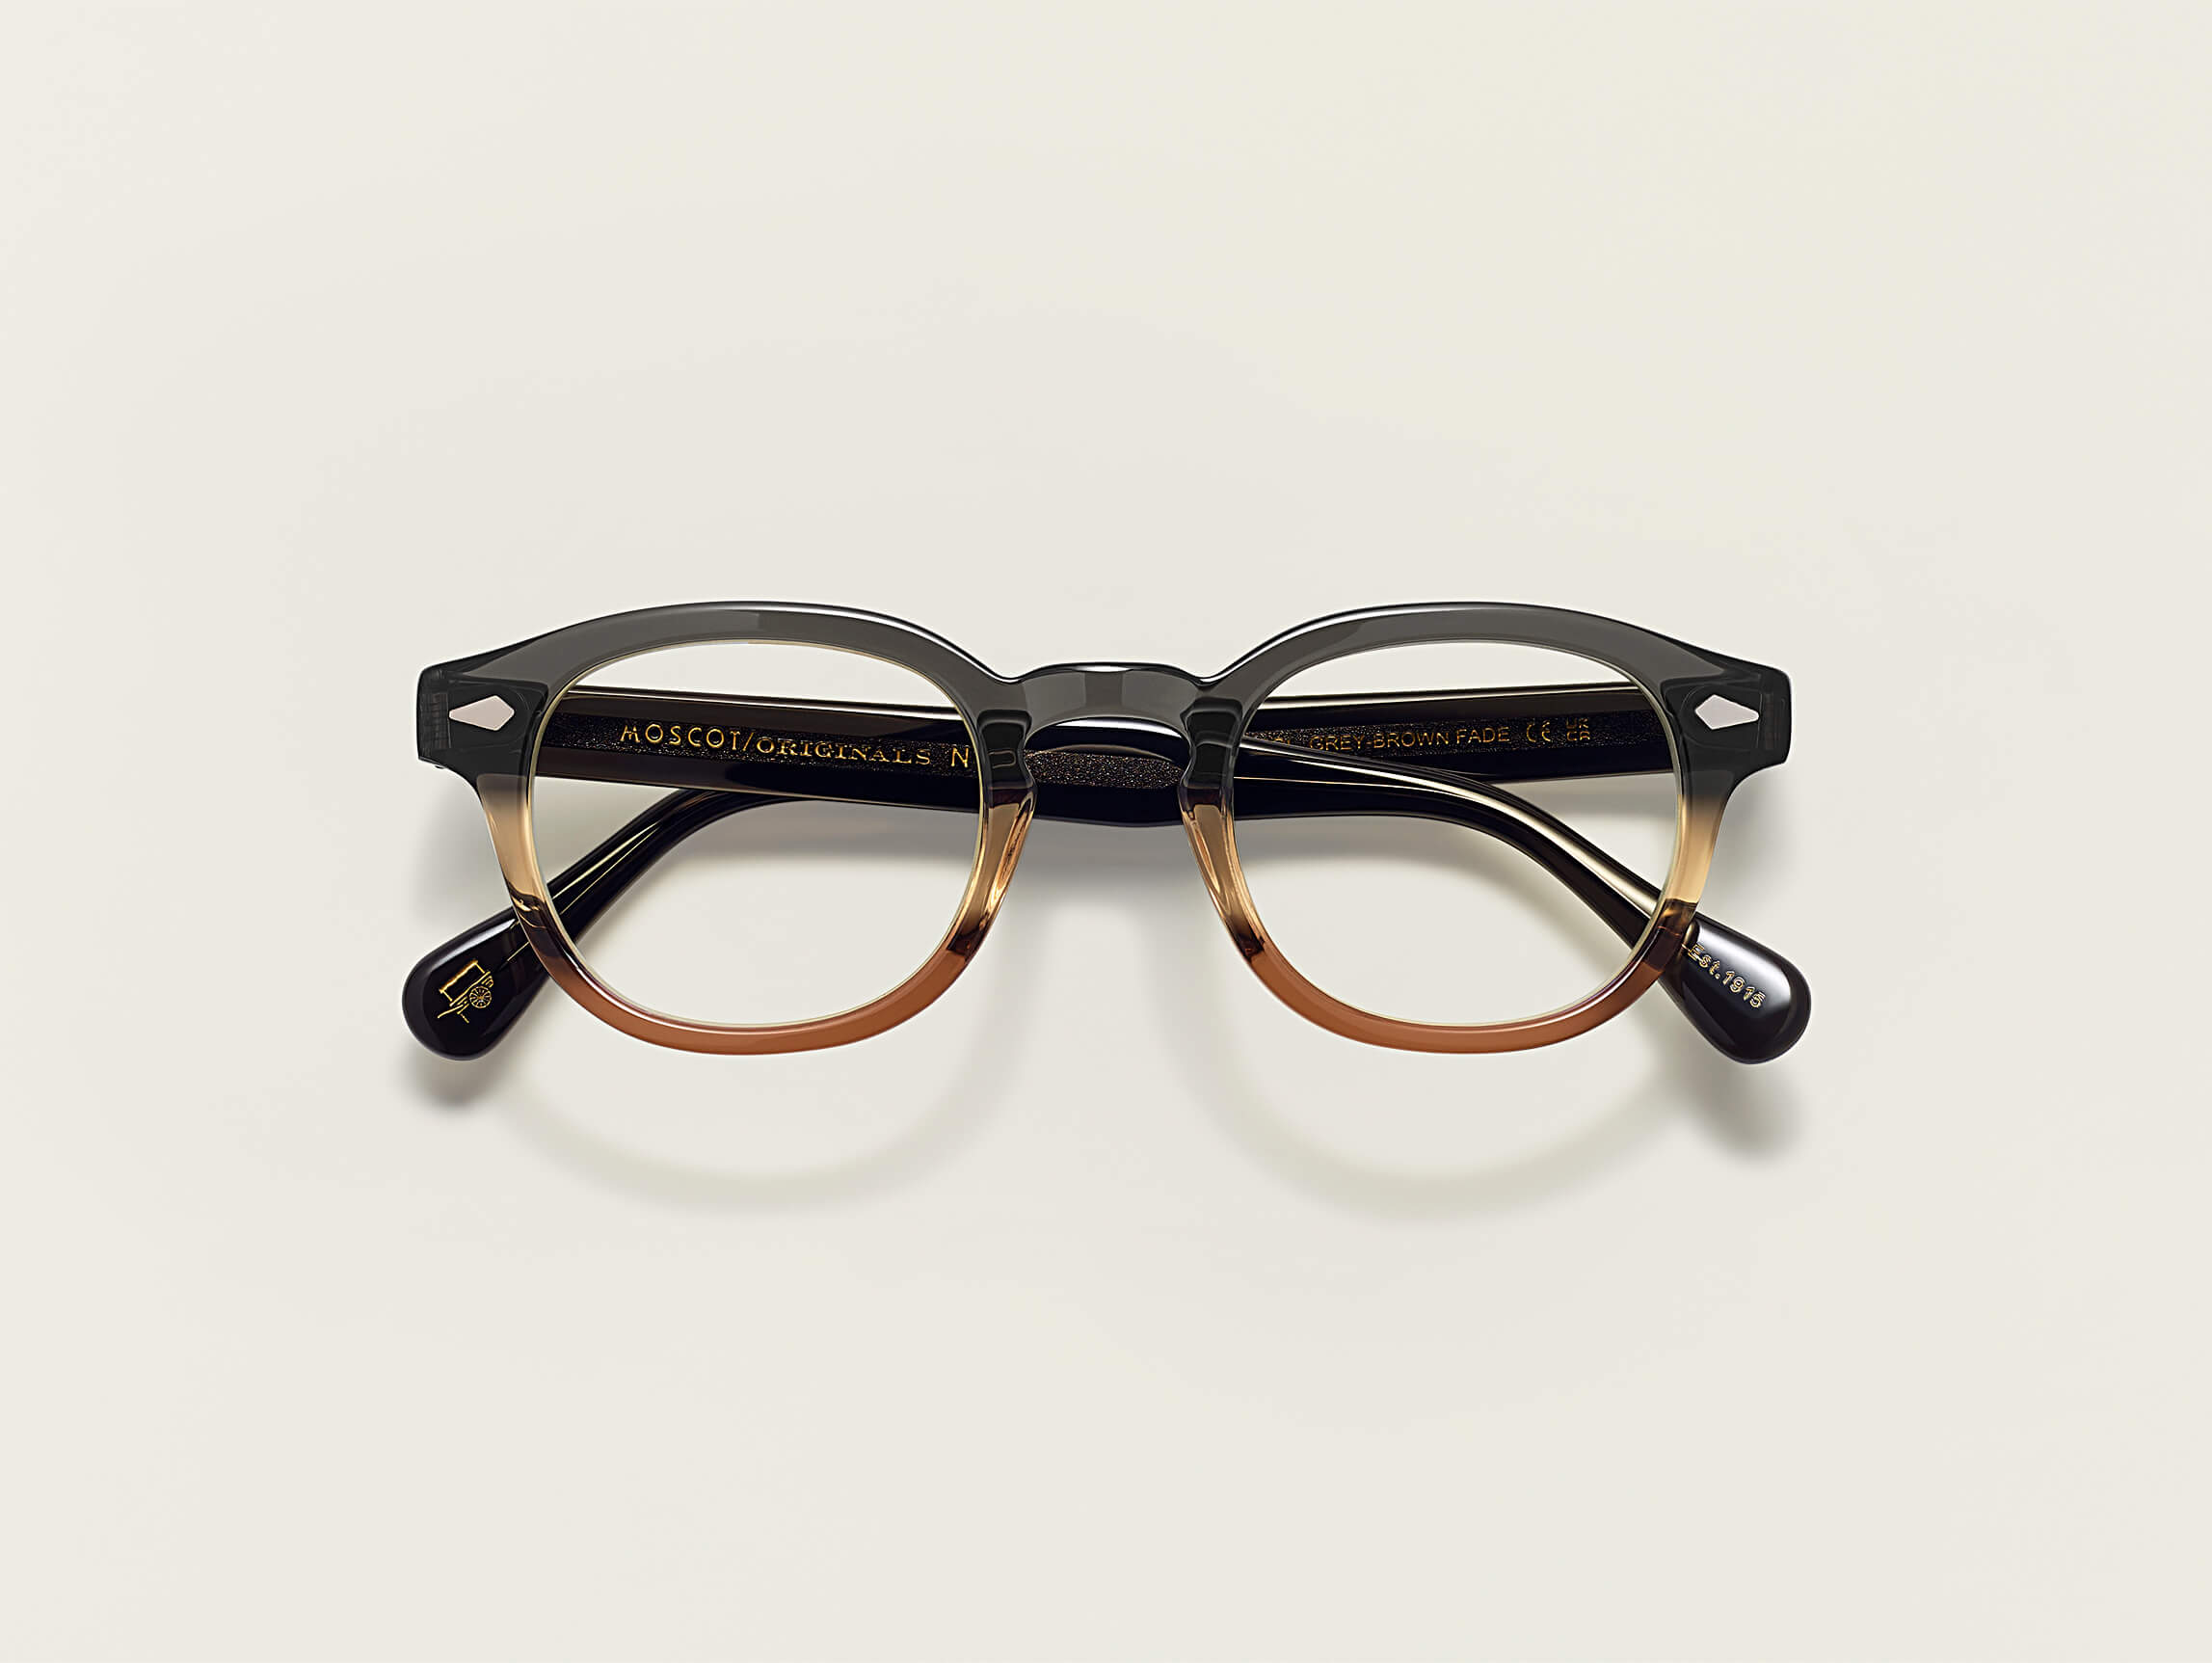 Eyeglasses | MOSCOT NYC SINCE 1915 | United States